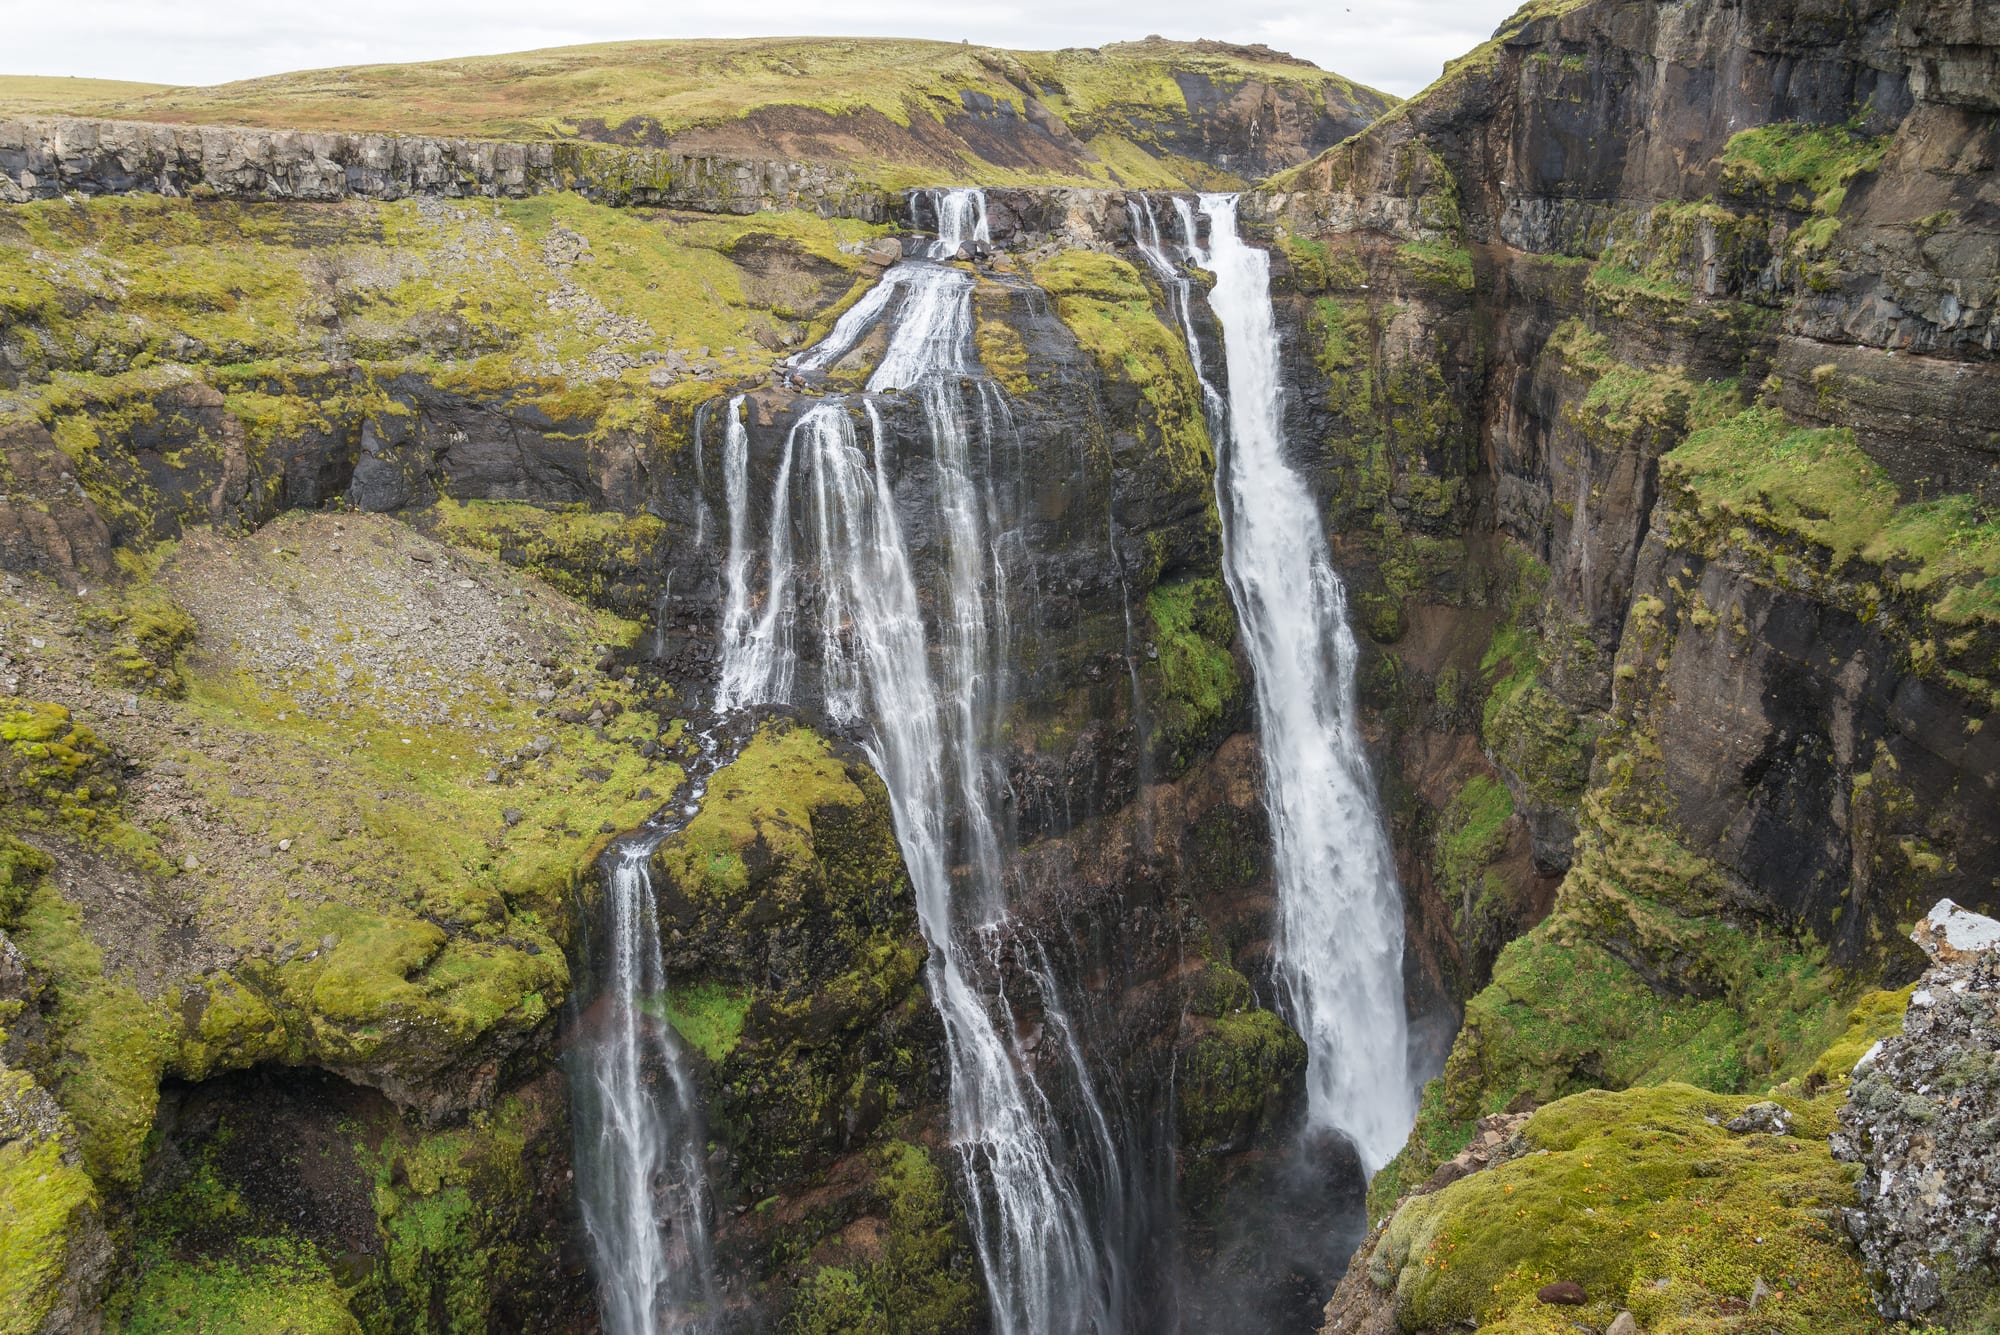 waterfall glymur iceland highest second hikes hike spray valley aerial canyon reykjavik waterfalls exploring western guide falls attractions tour local